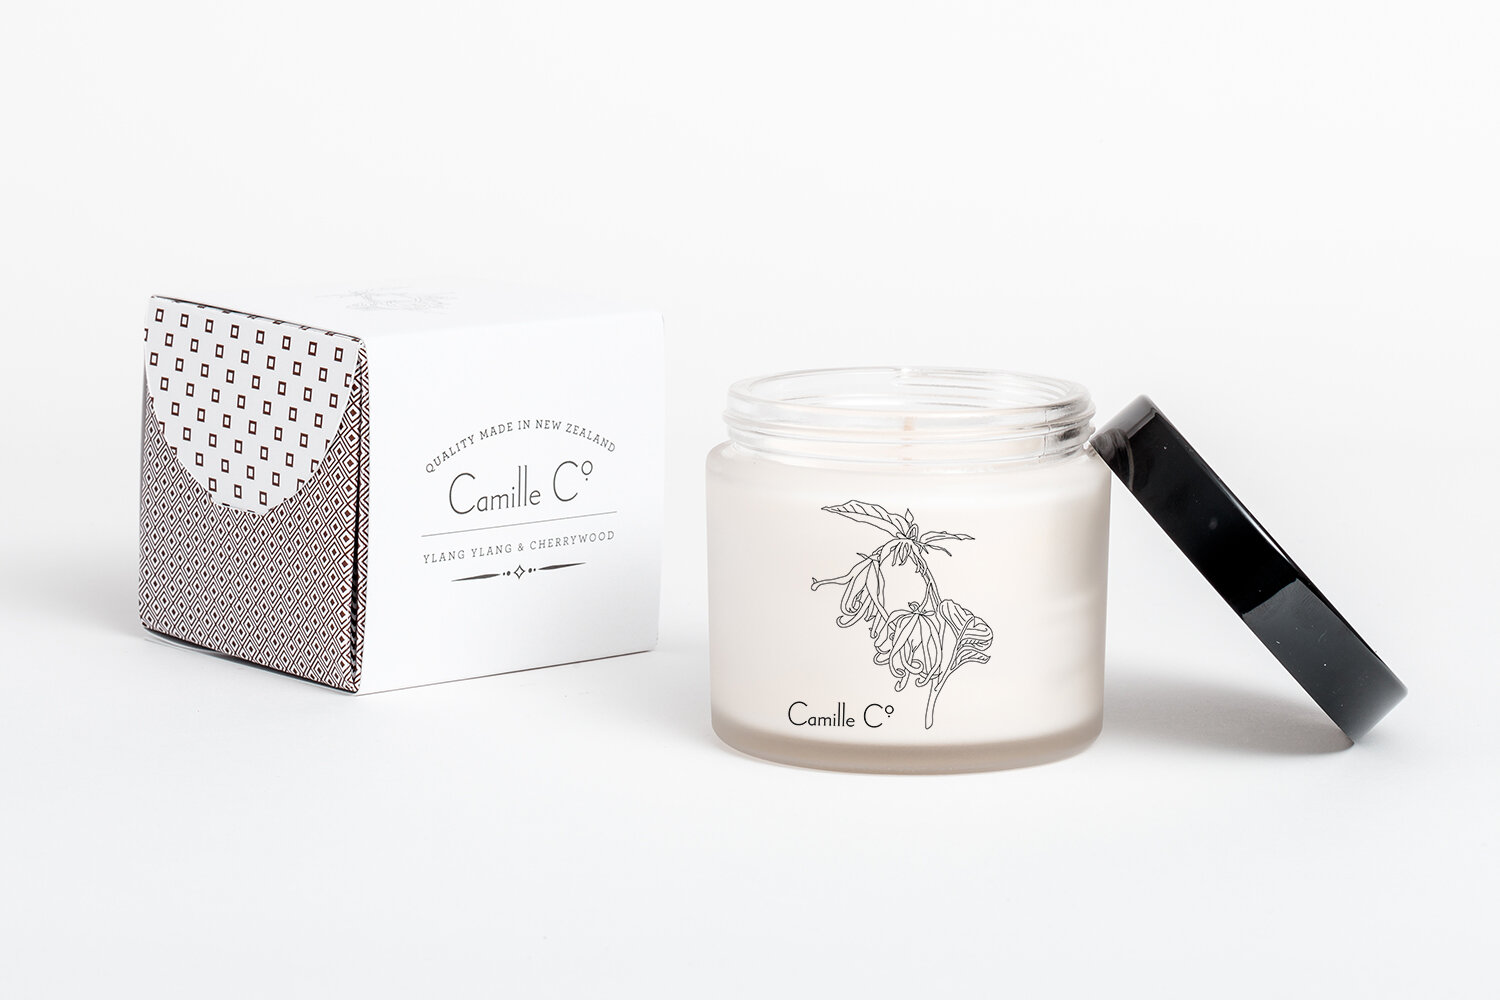 Camille Co. luxury Ylang Ylang &amp; Cherrywood Soy Candle